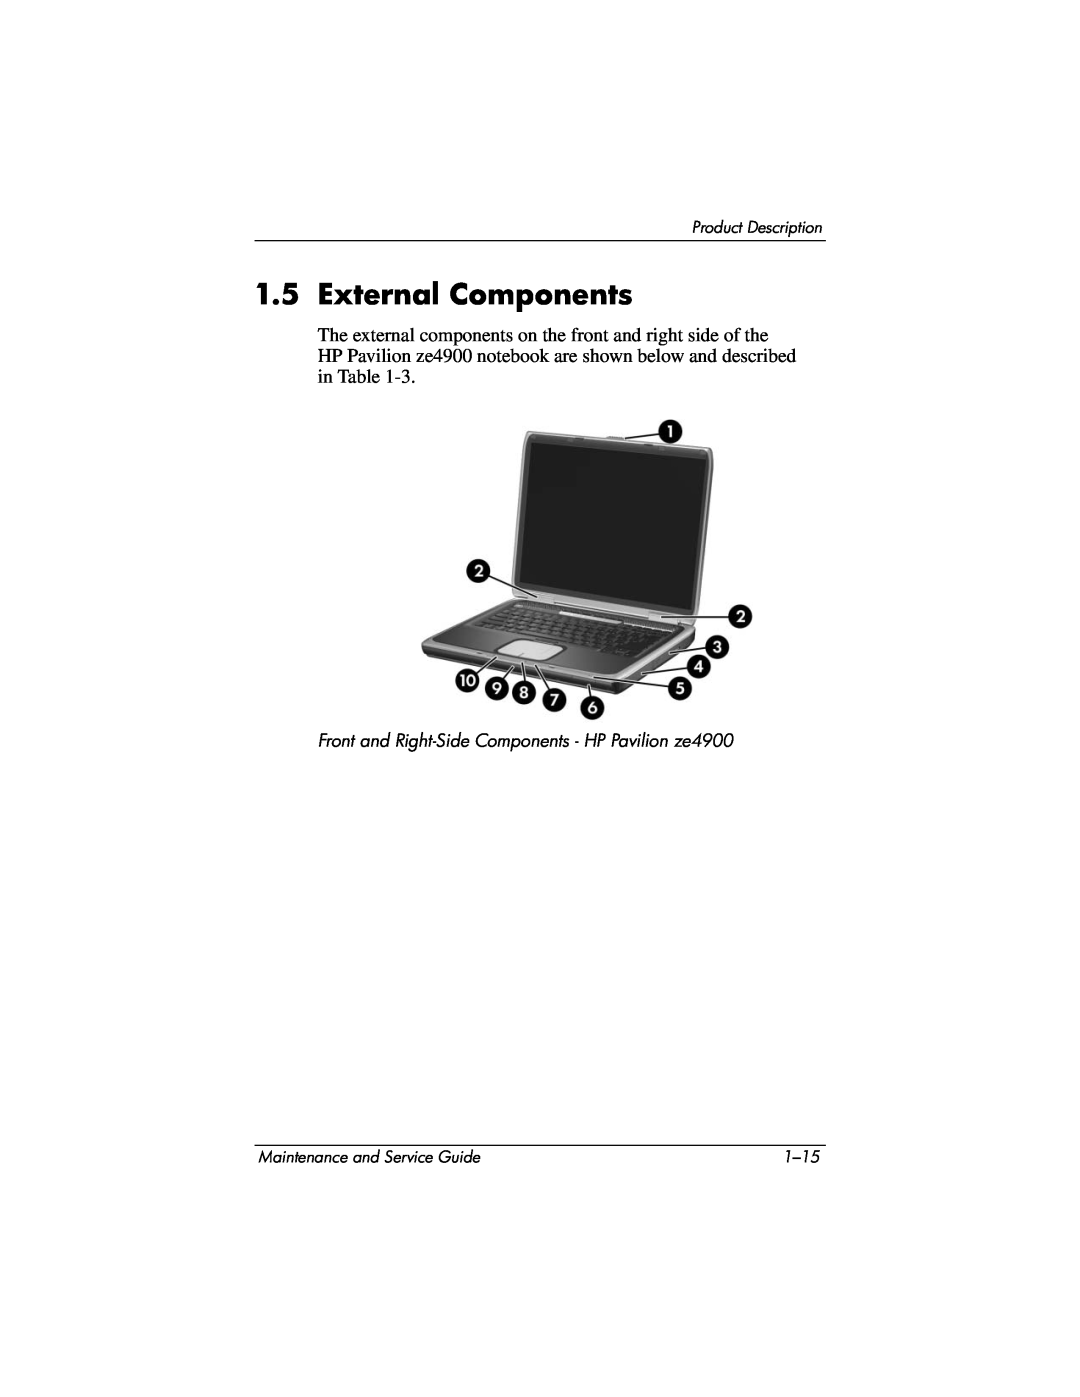 HP NX9040, NX9030 External Components, Front and Right-Side Components - HP Pavilion ze4900, Product Description, 1-15 